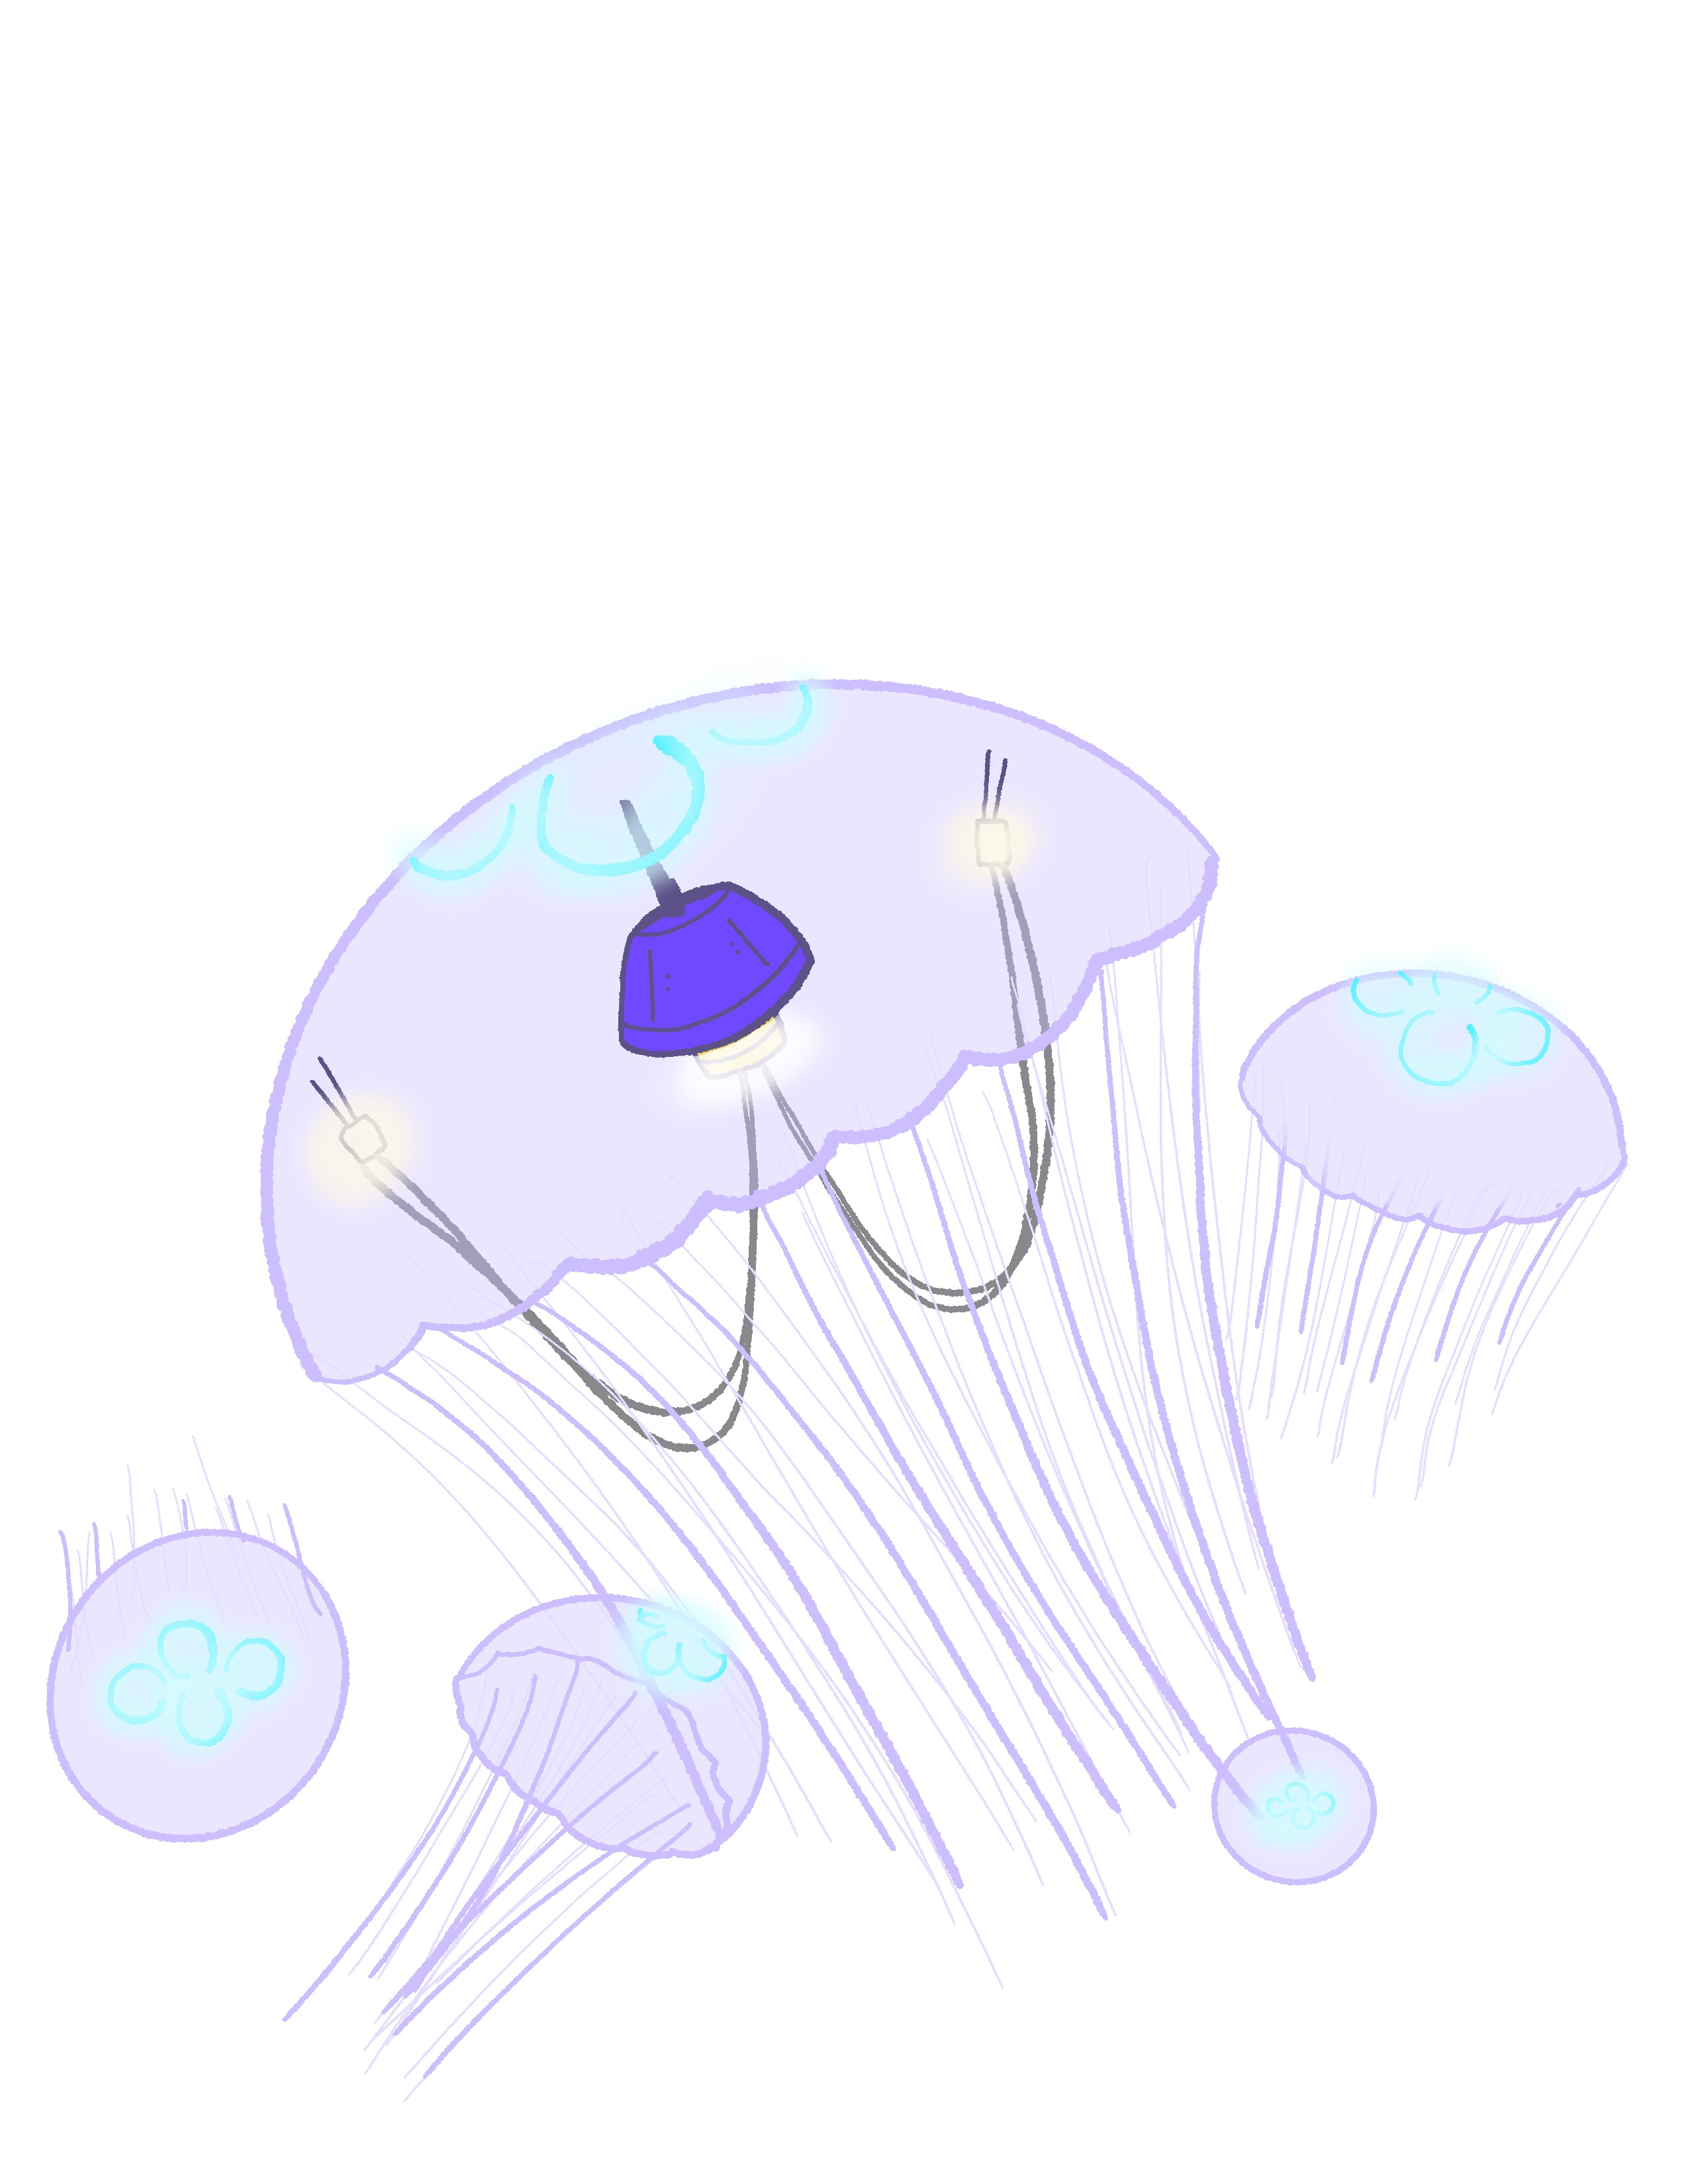 illustrated jellyfish with a data prosthetic inside the bell of the jellyfish.